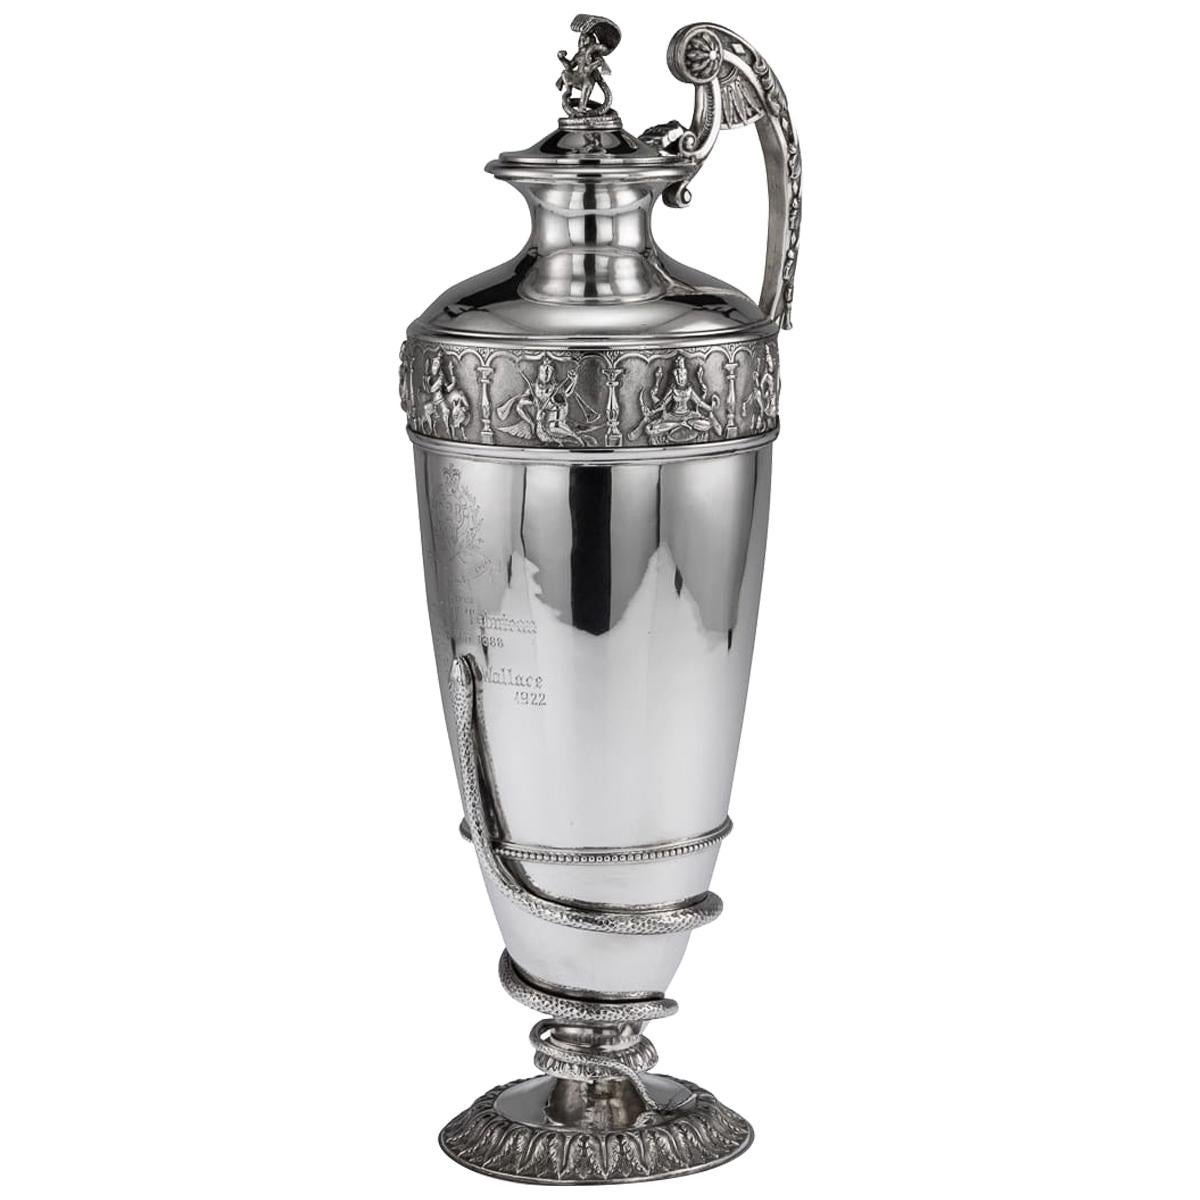 20th Century Indian Solid Silver 28th Regiment Ewer, P.Orr & Sons, circa 1900